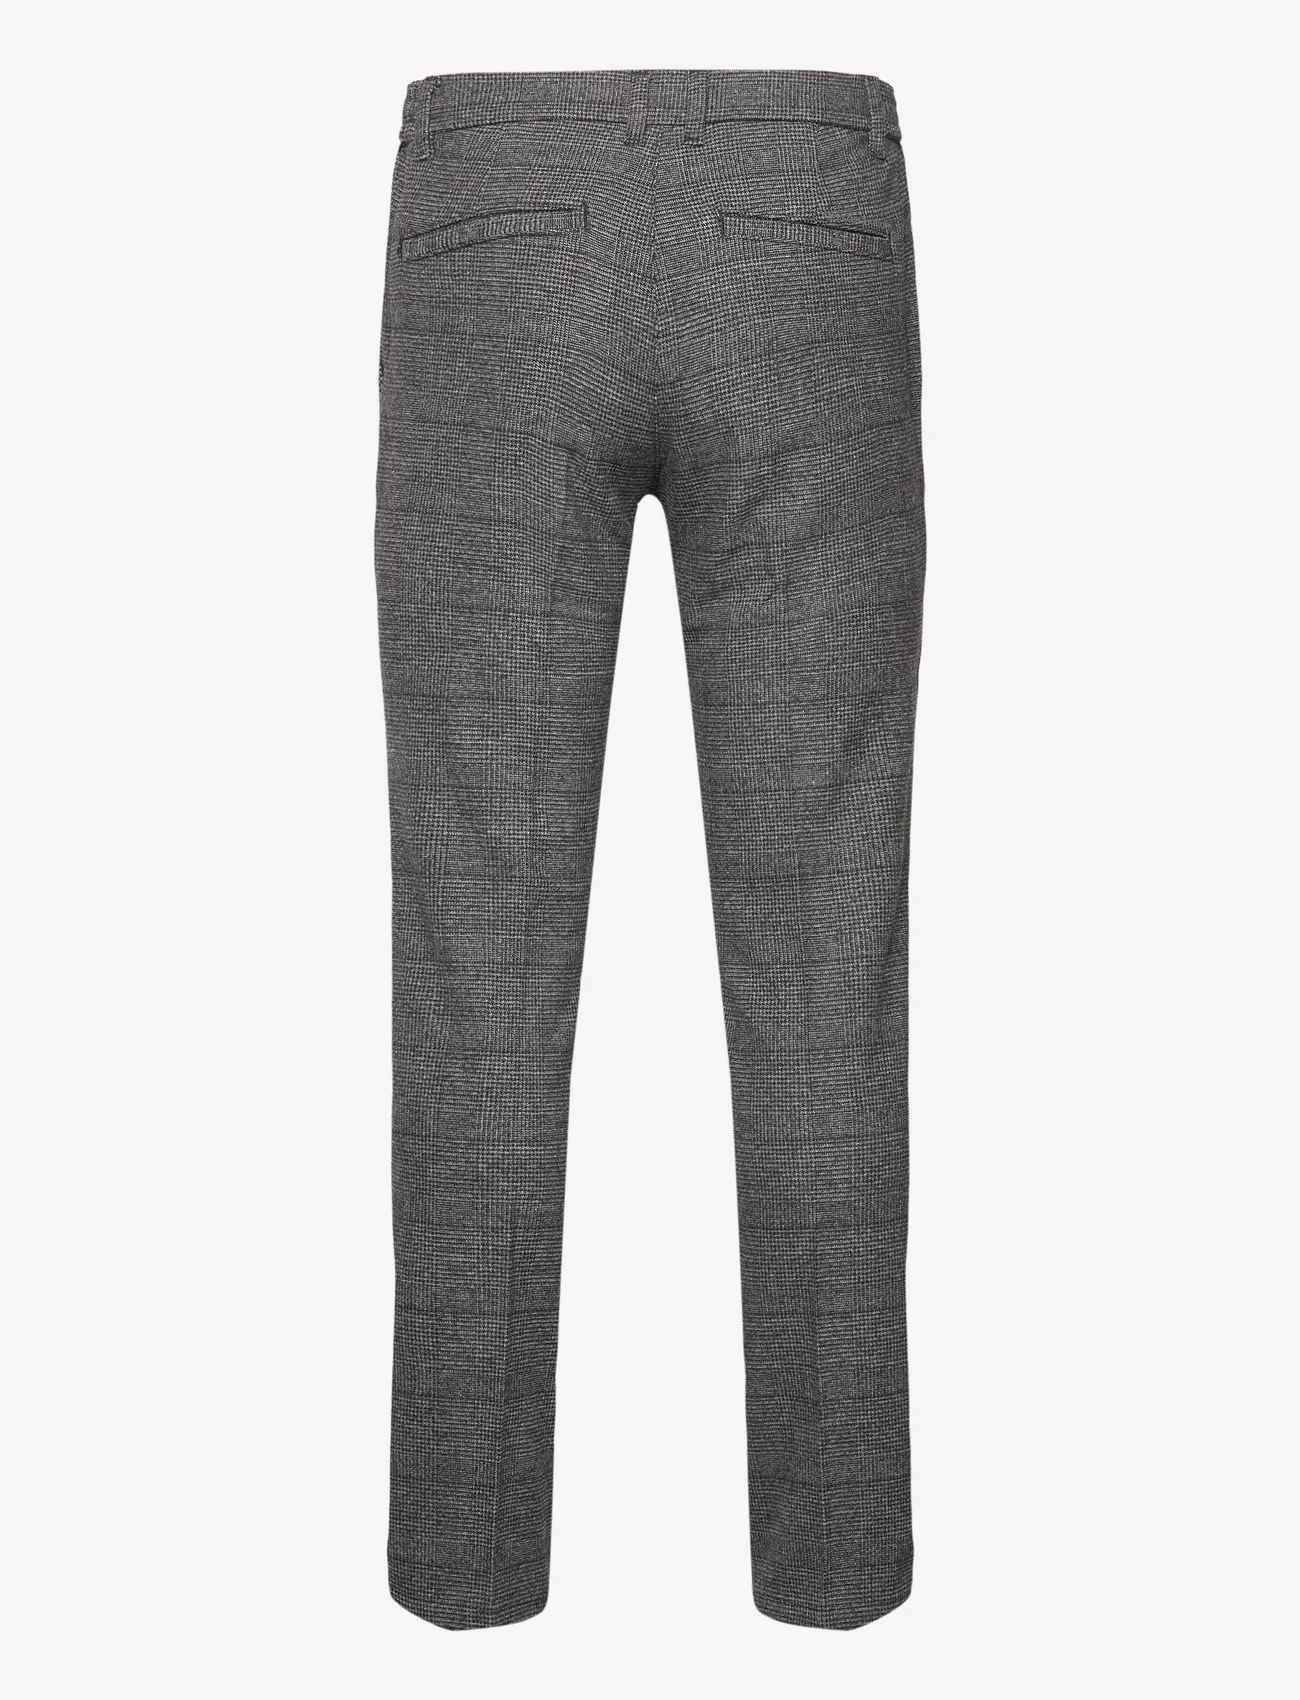 Tom Tailor - regular chino - suit trousers - grey black grindle check - 1